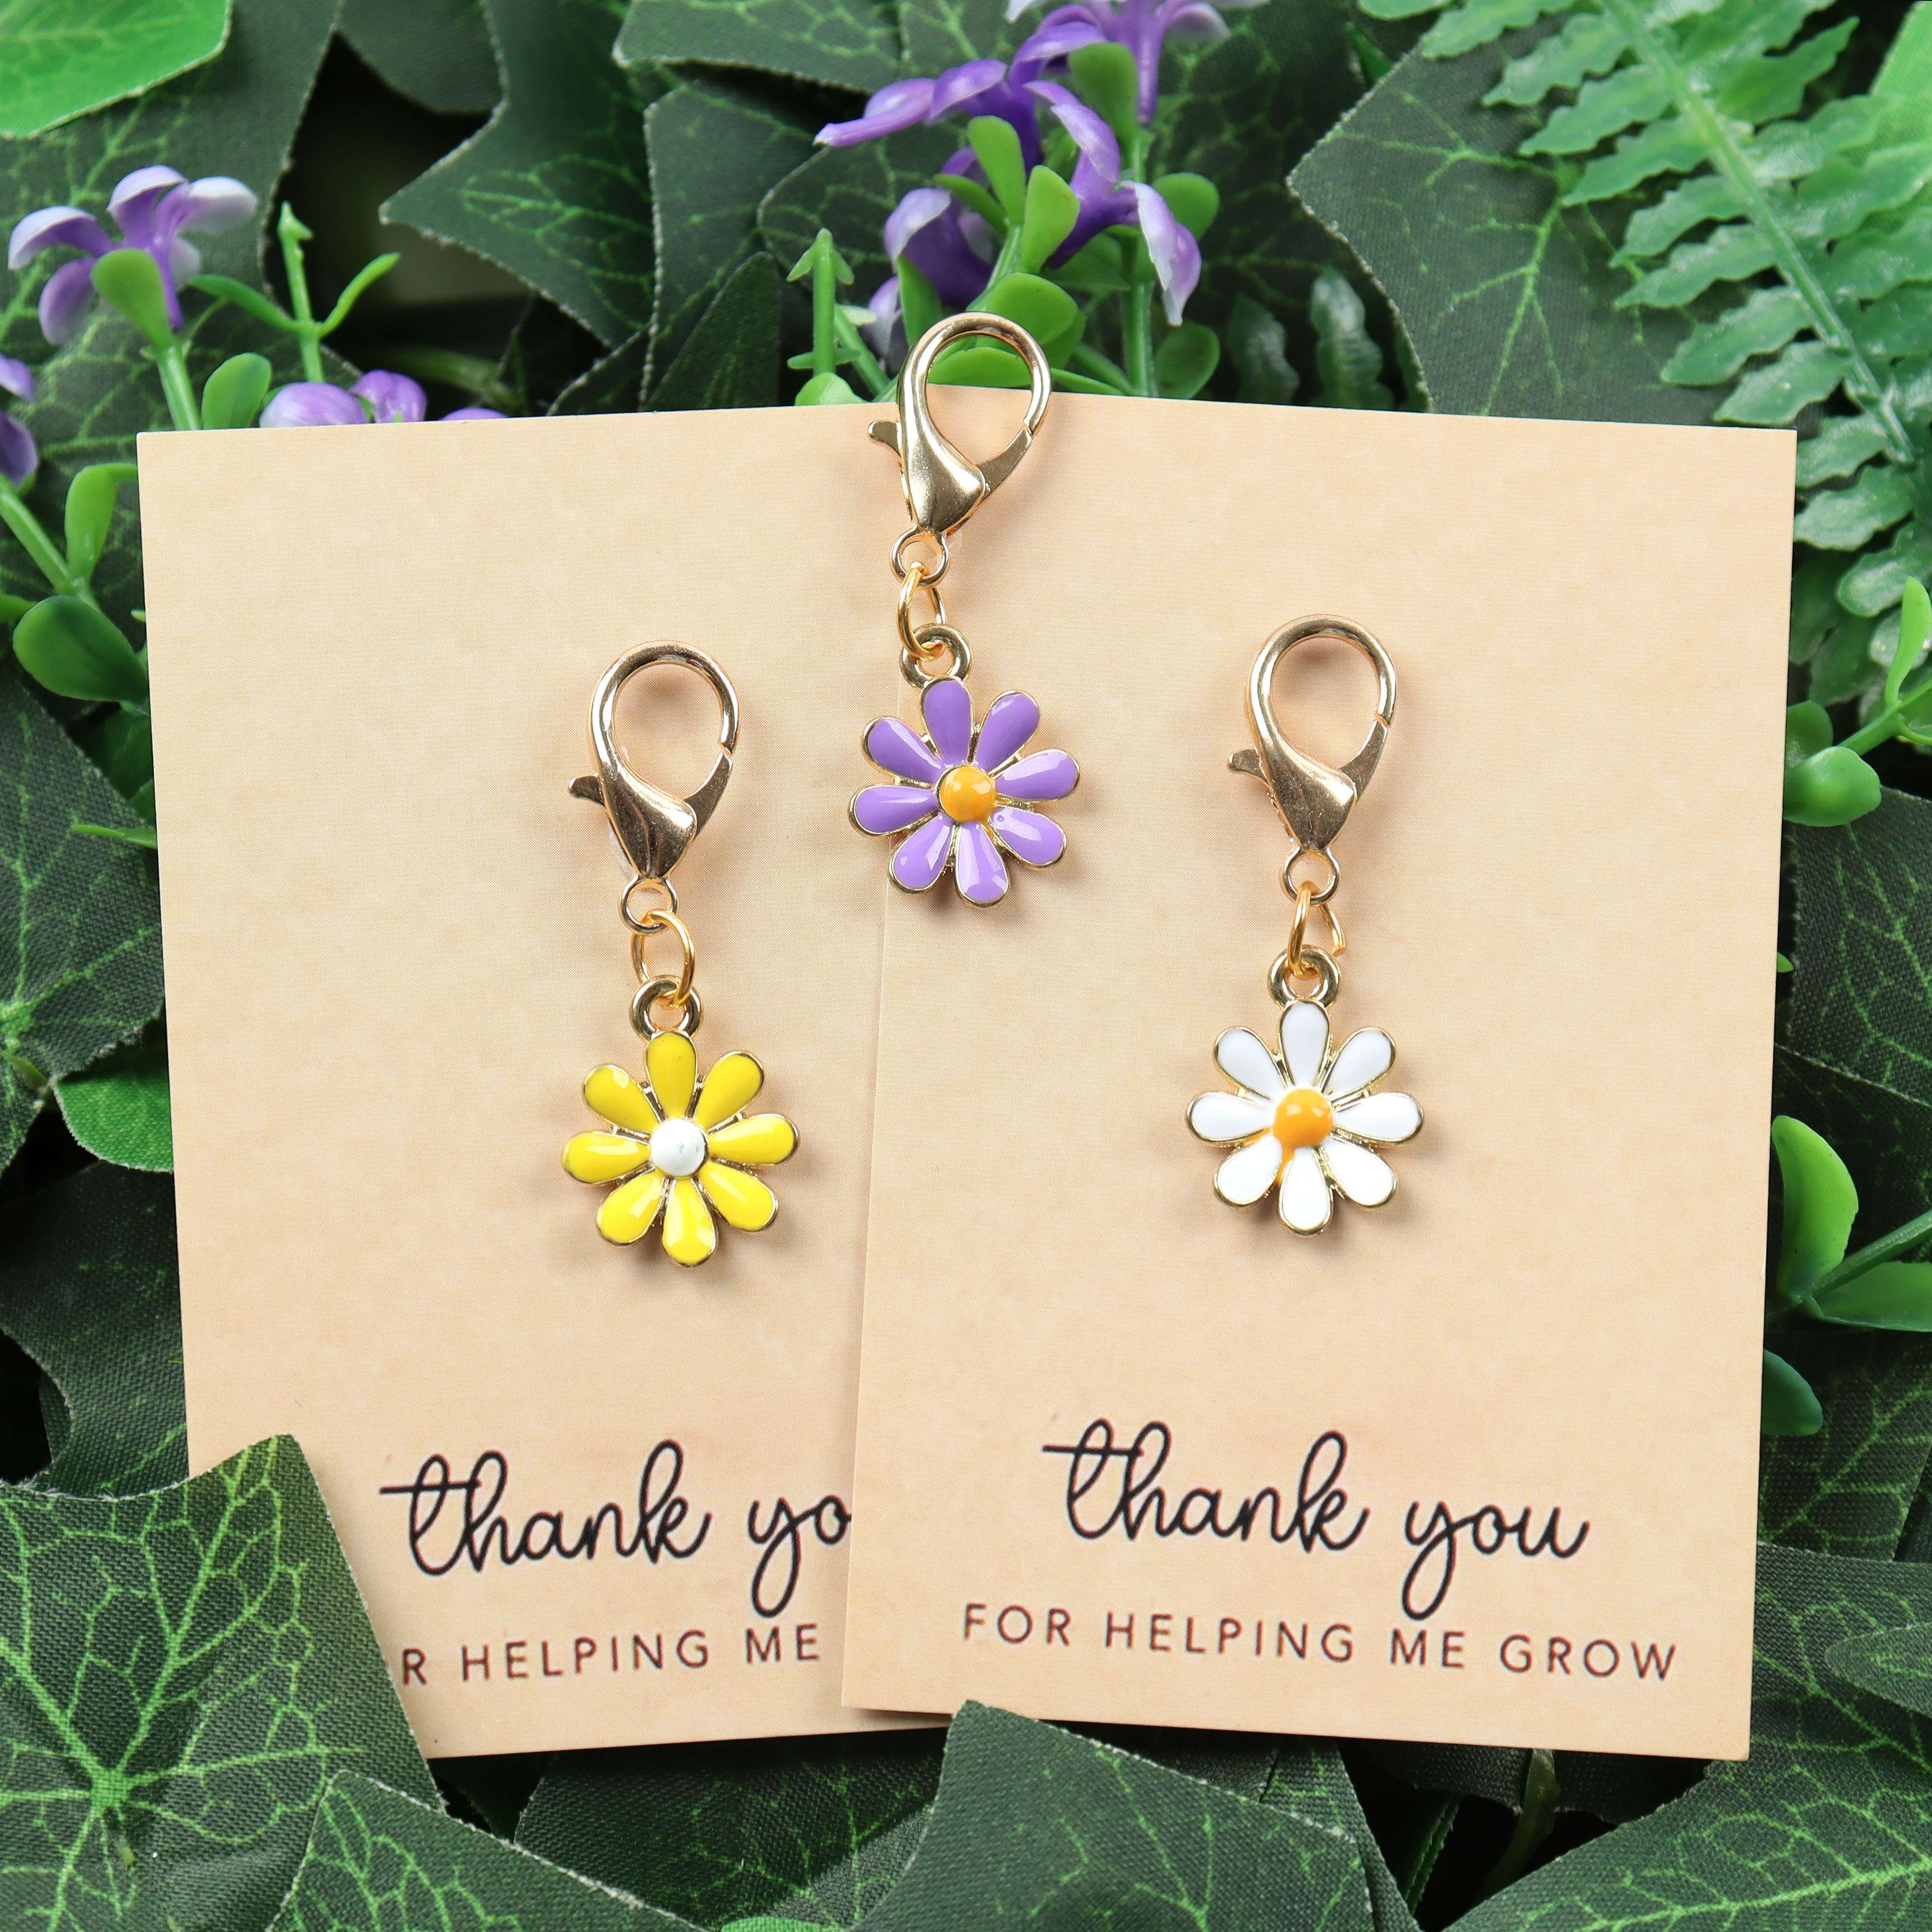 

thank You For Helping Me Grow" Daisy Keychain - Cute Cartoon Miniature, Zinc Alloy, Perfect Thanksgiving Or Inspirational Gift For Friends (1pc/2pcs Option)